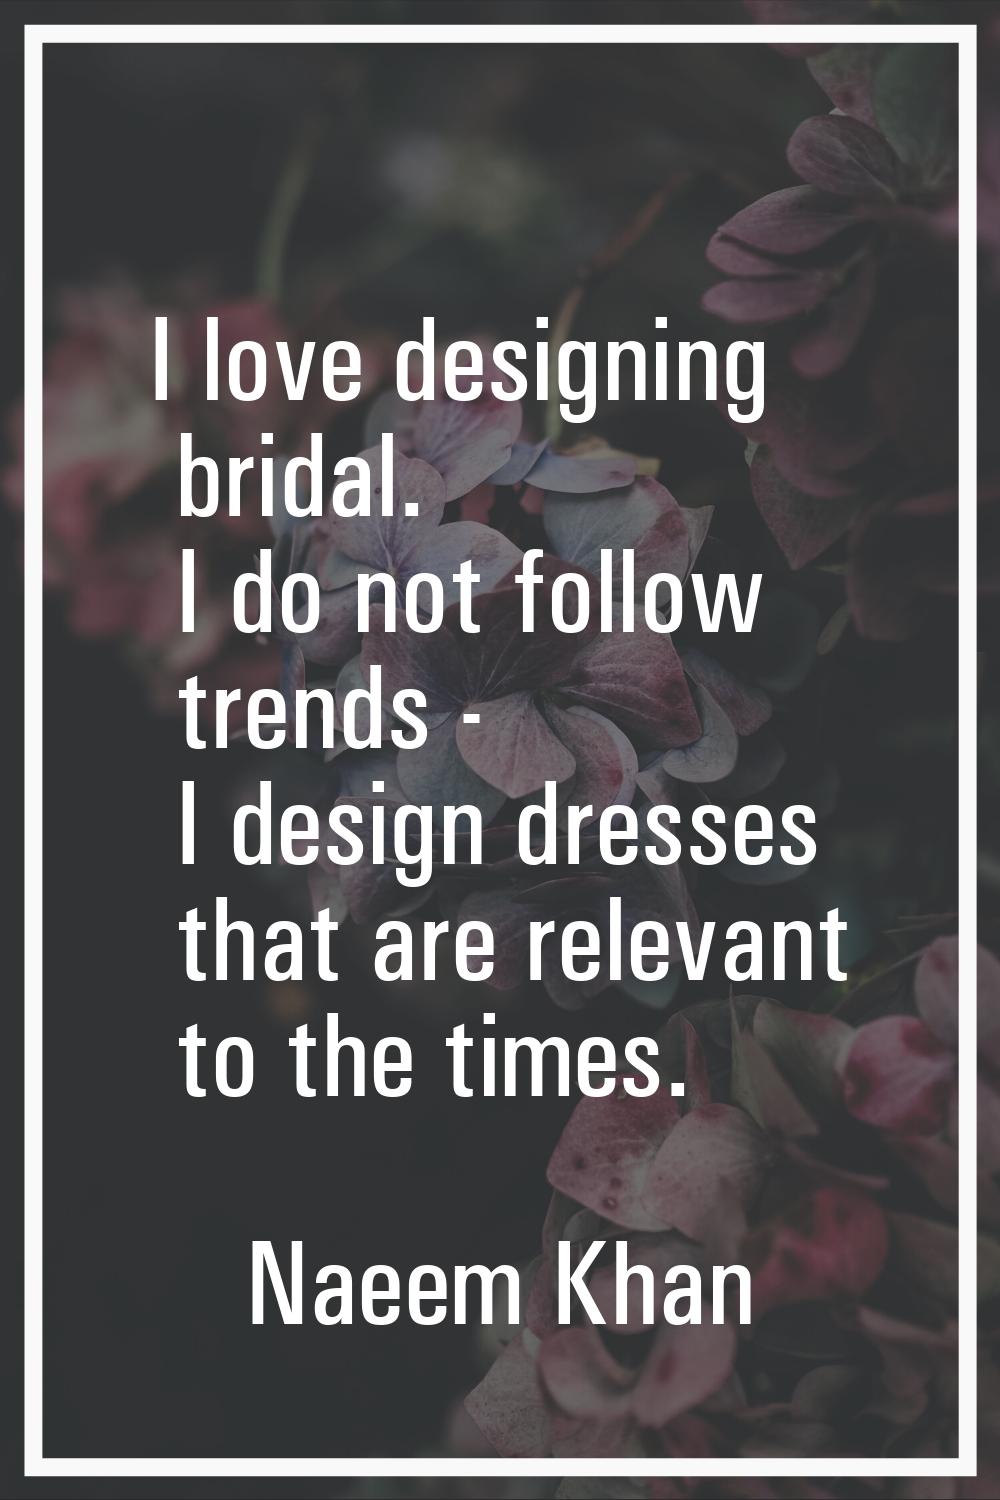 I love designing bridal. I do not follow trends - I design dresses that are relevant to the times.